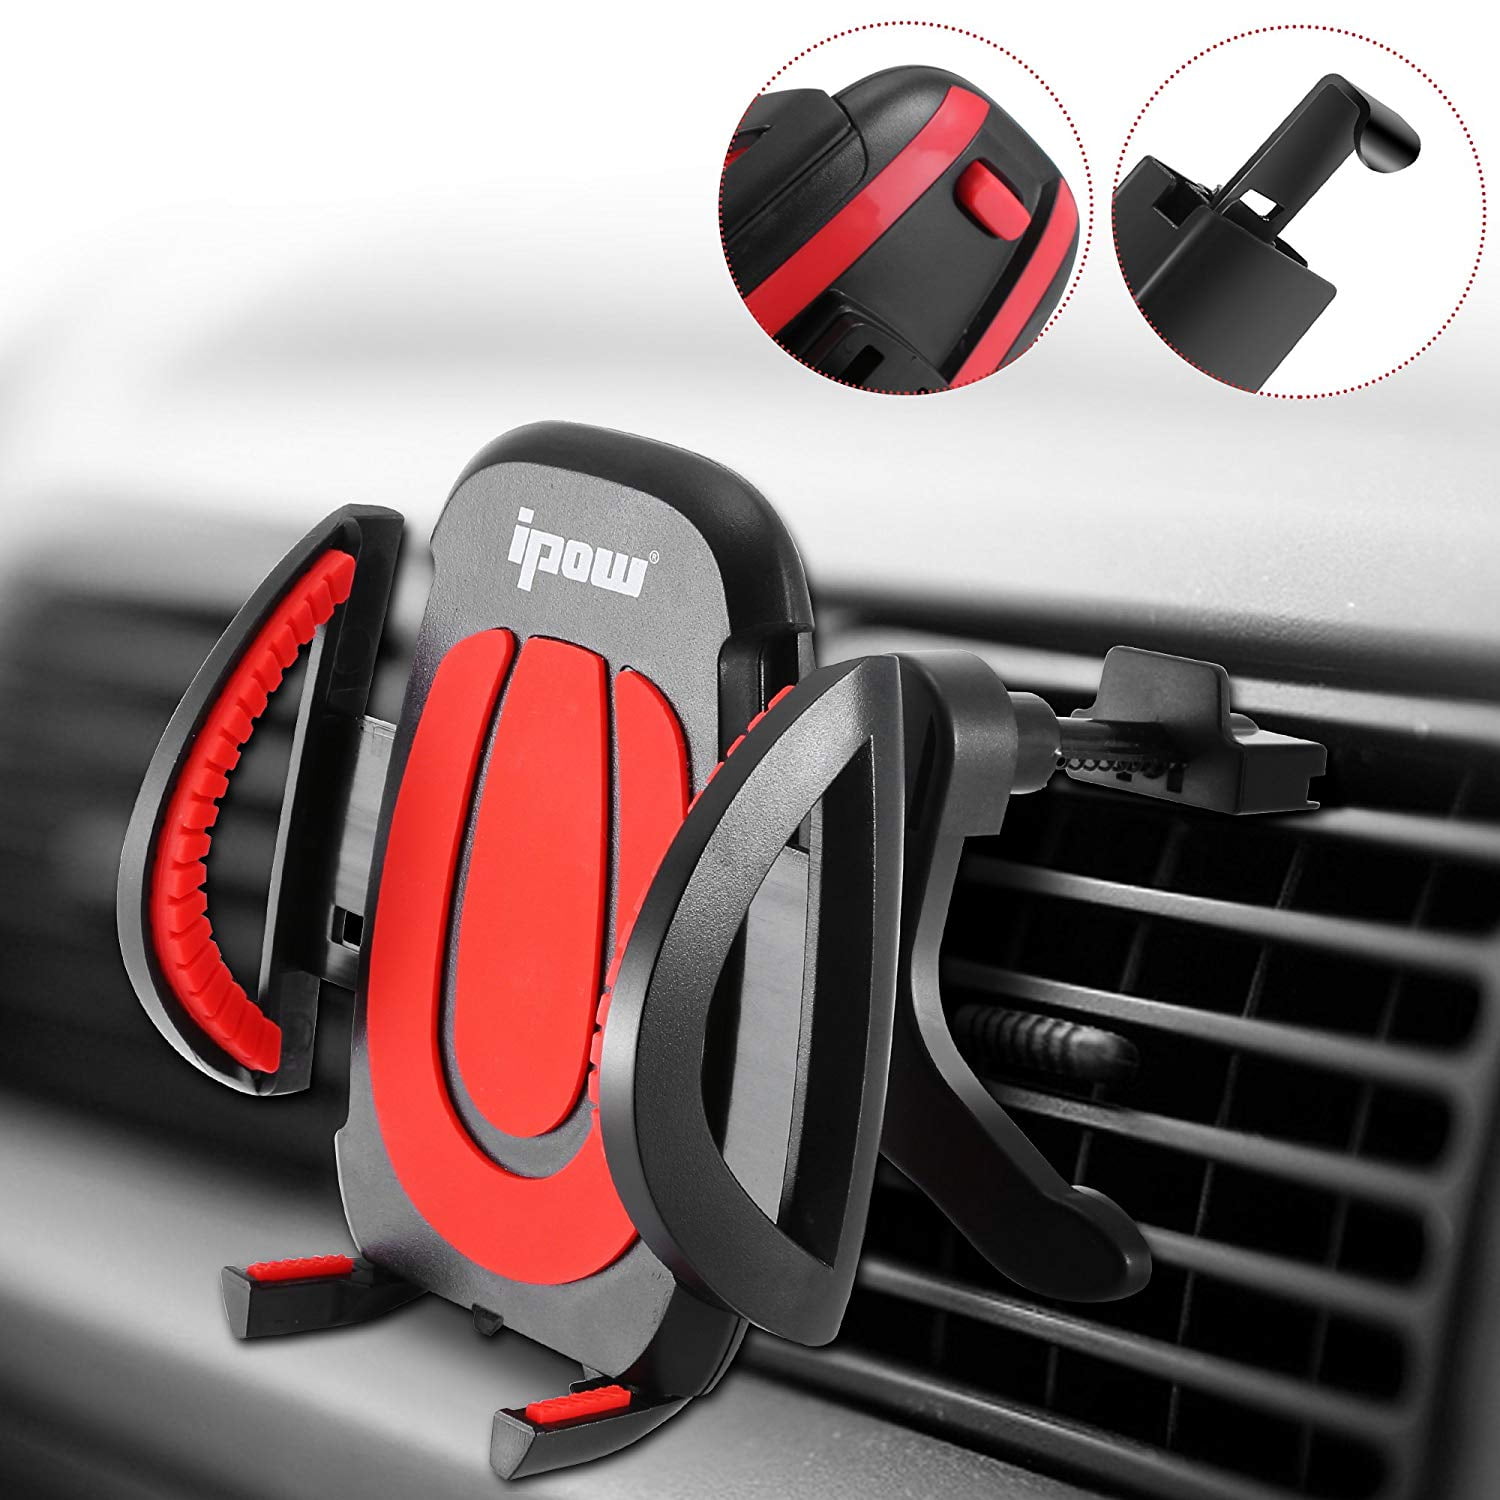 HSS Car Air Vent Gravity Phone Mount,Anti-Slip and One-Hand Operation Car Vent Cell Phone Mount,360 Degree Adjustable Car Phone Holder Compatible with All Smartphone Black